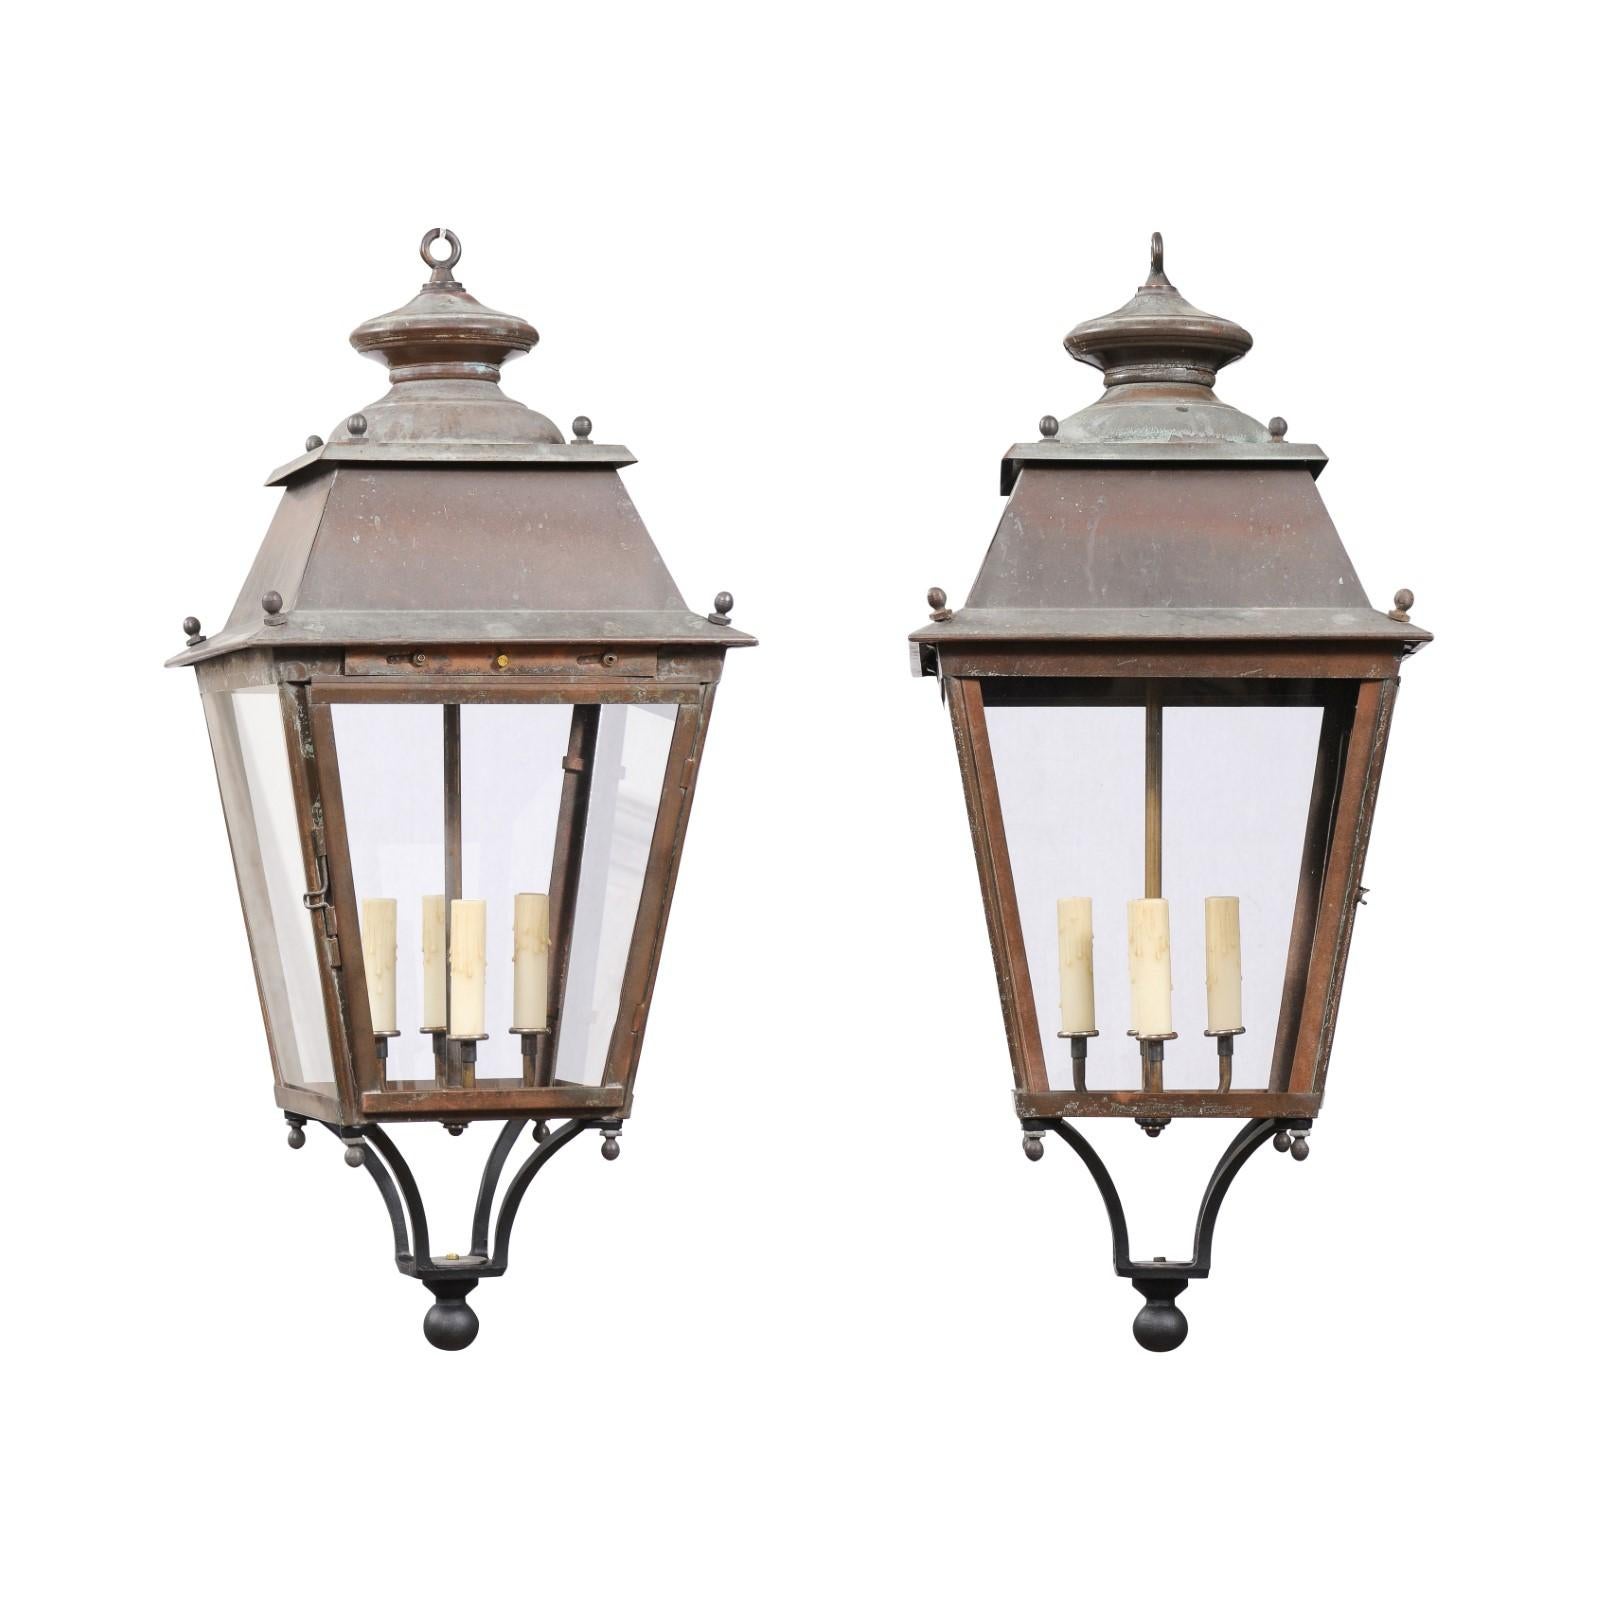 Two French copper lanterns from the 20th century, with four lights, glass panels, finial and rustic character. They are priced and sold each. These French copper lanterns from the 20th century beautifully encapsulate the charm of rustic elegance.